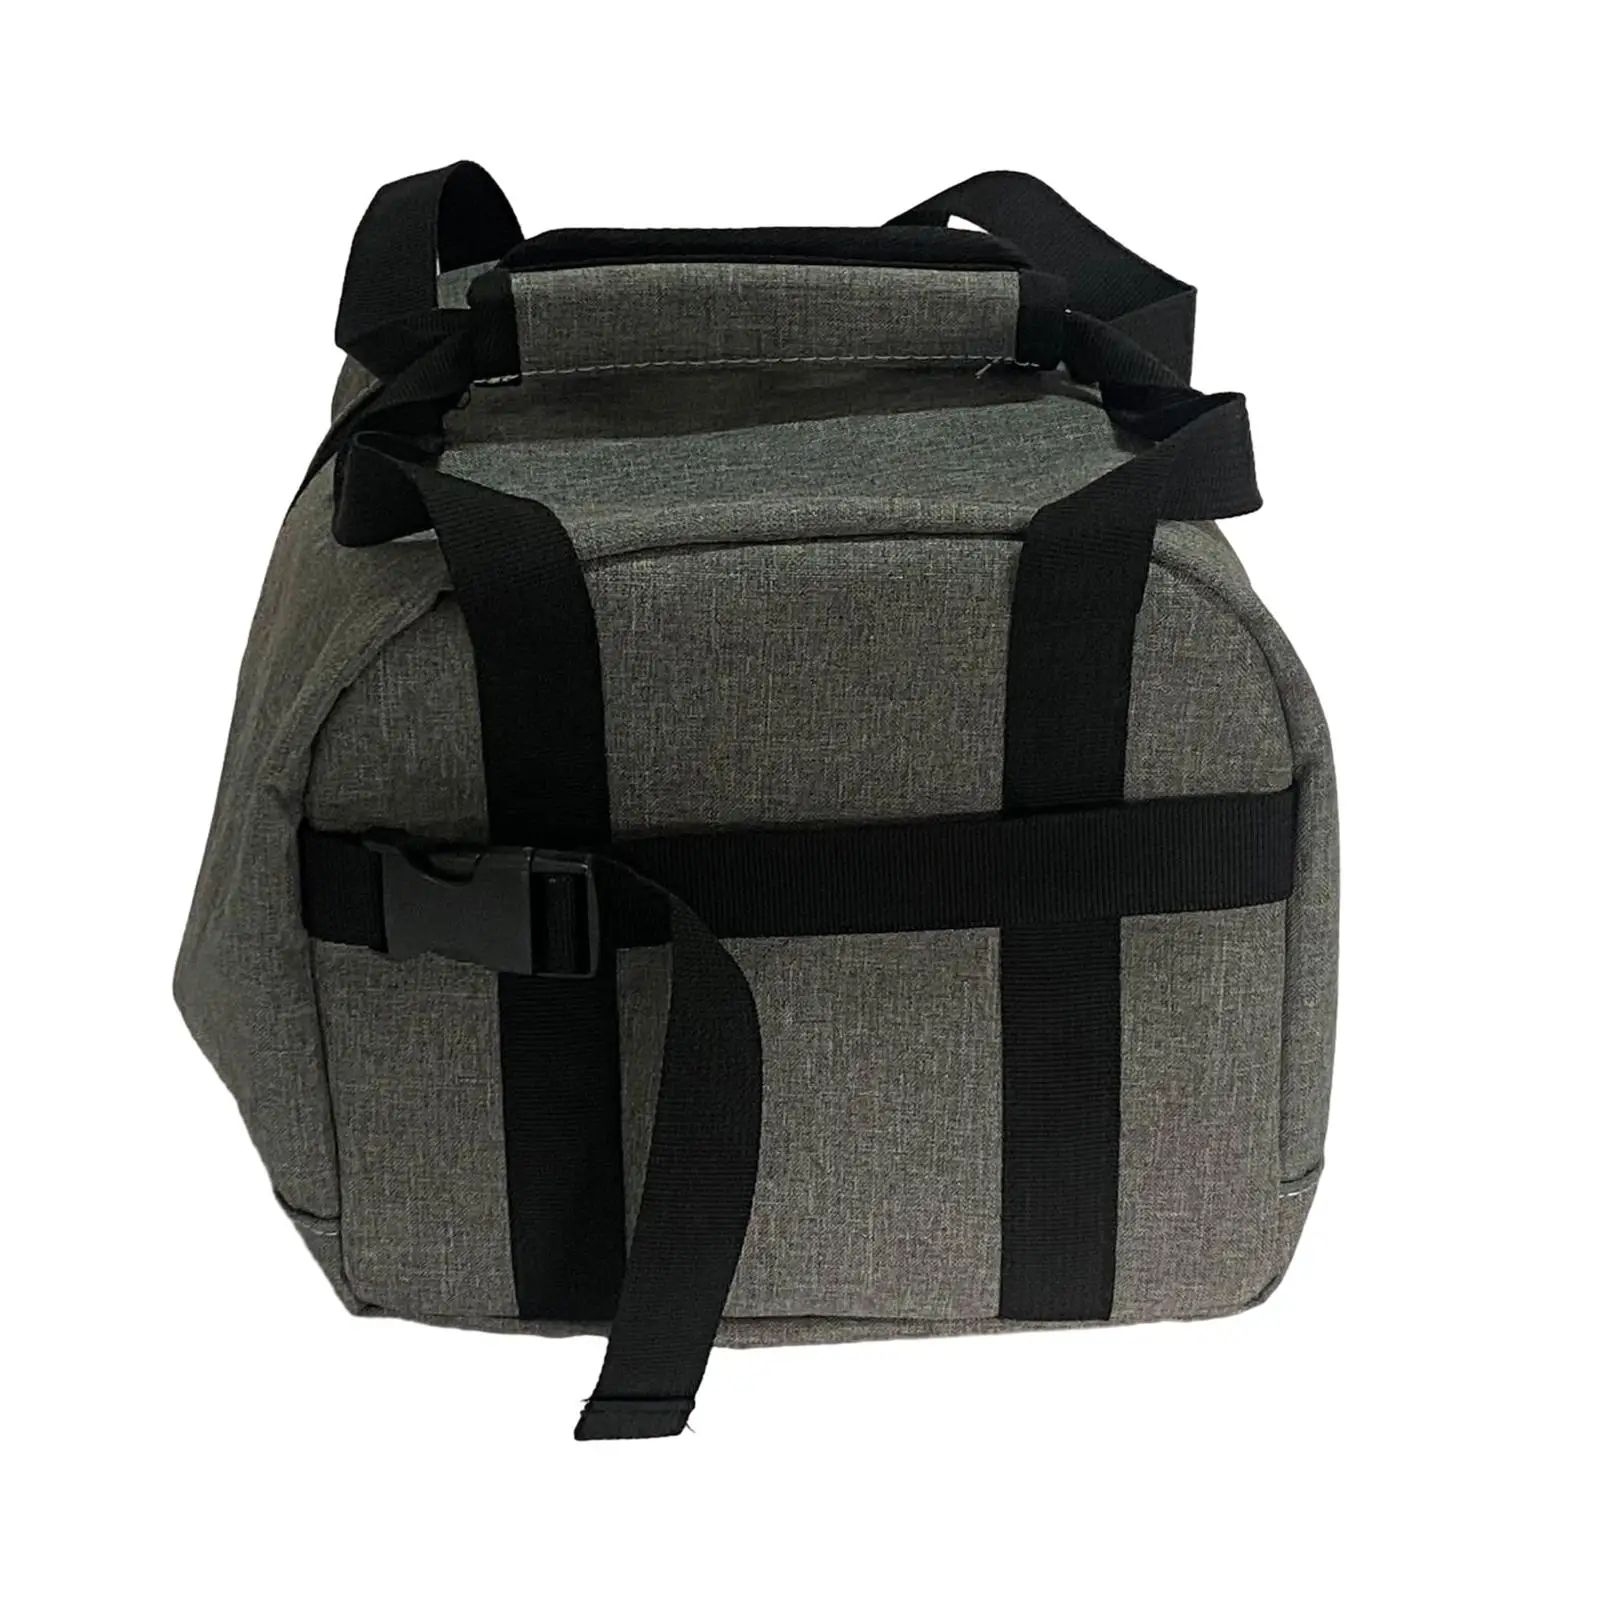 Single Bowling Ball Bag Durable Compact Easy to Carry Carrier Add on for Luggage Double Zipper Handbag Bowling Tote Bowling Gift